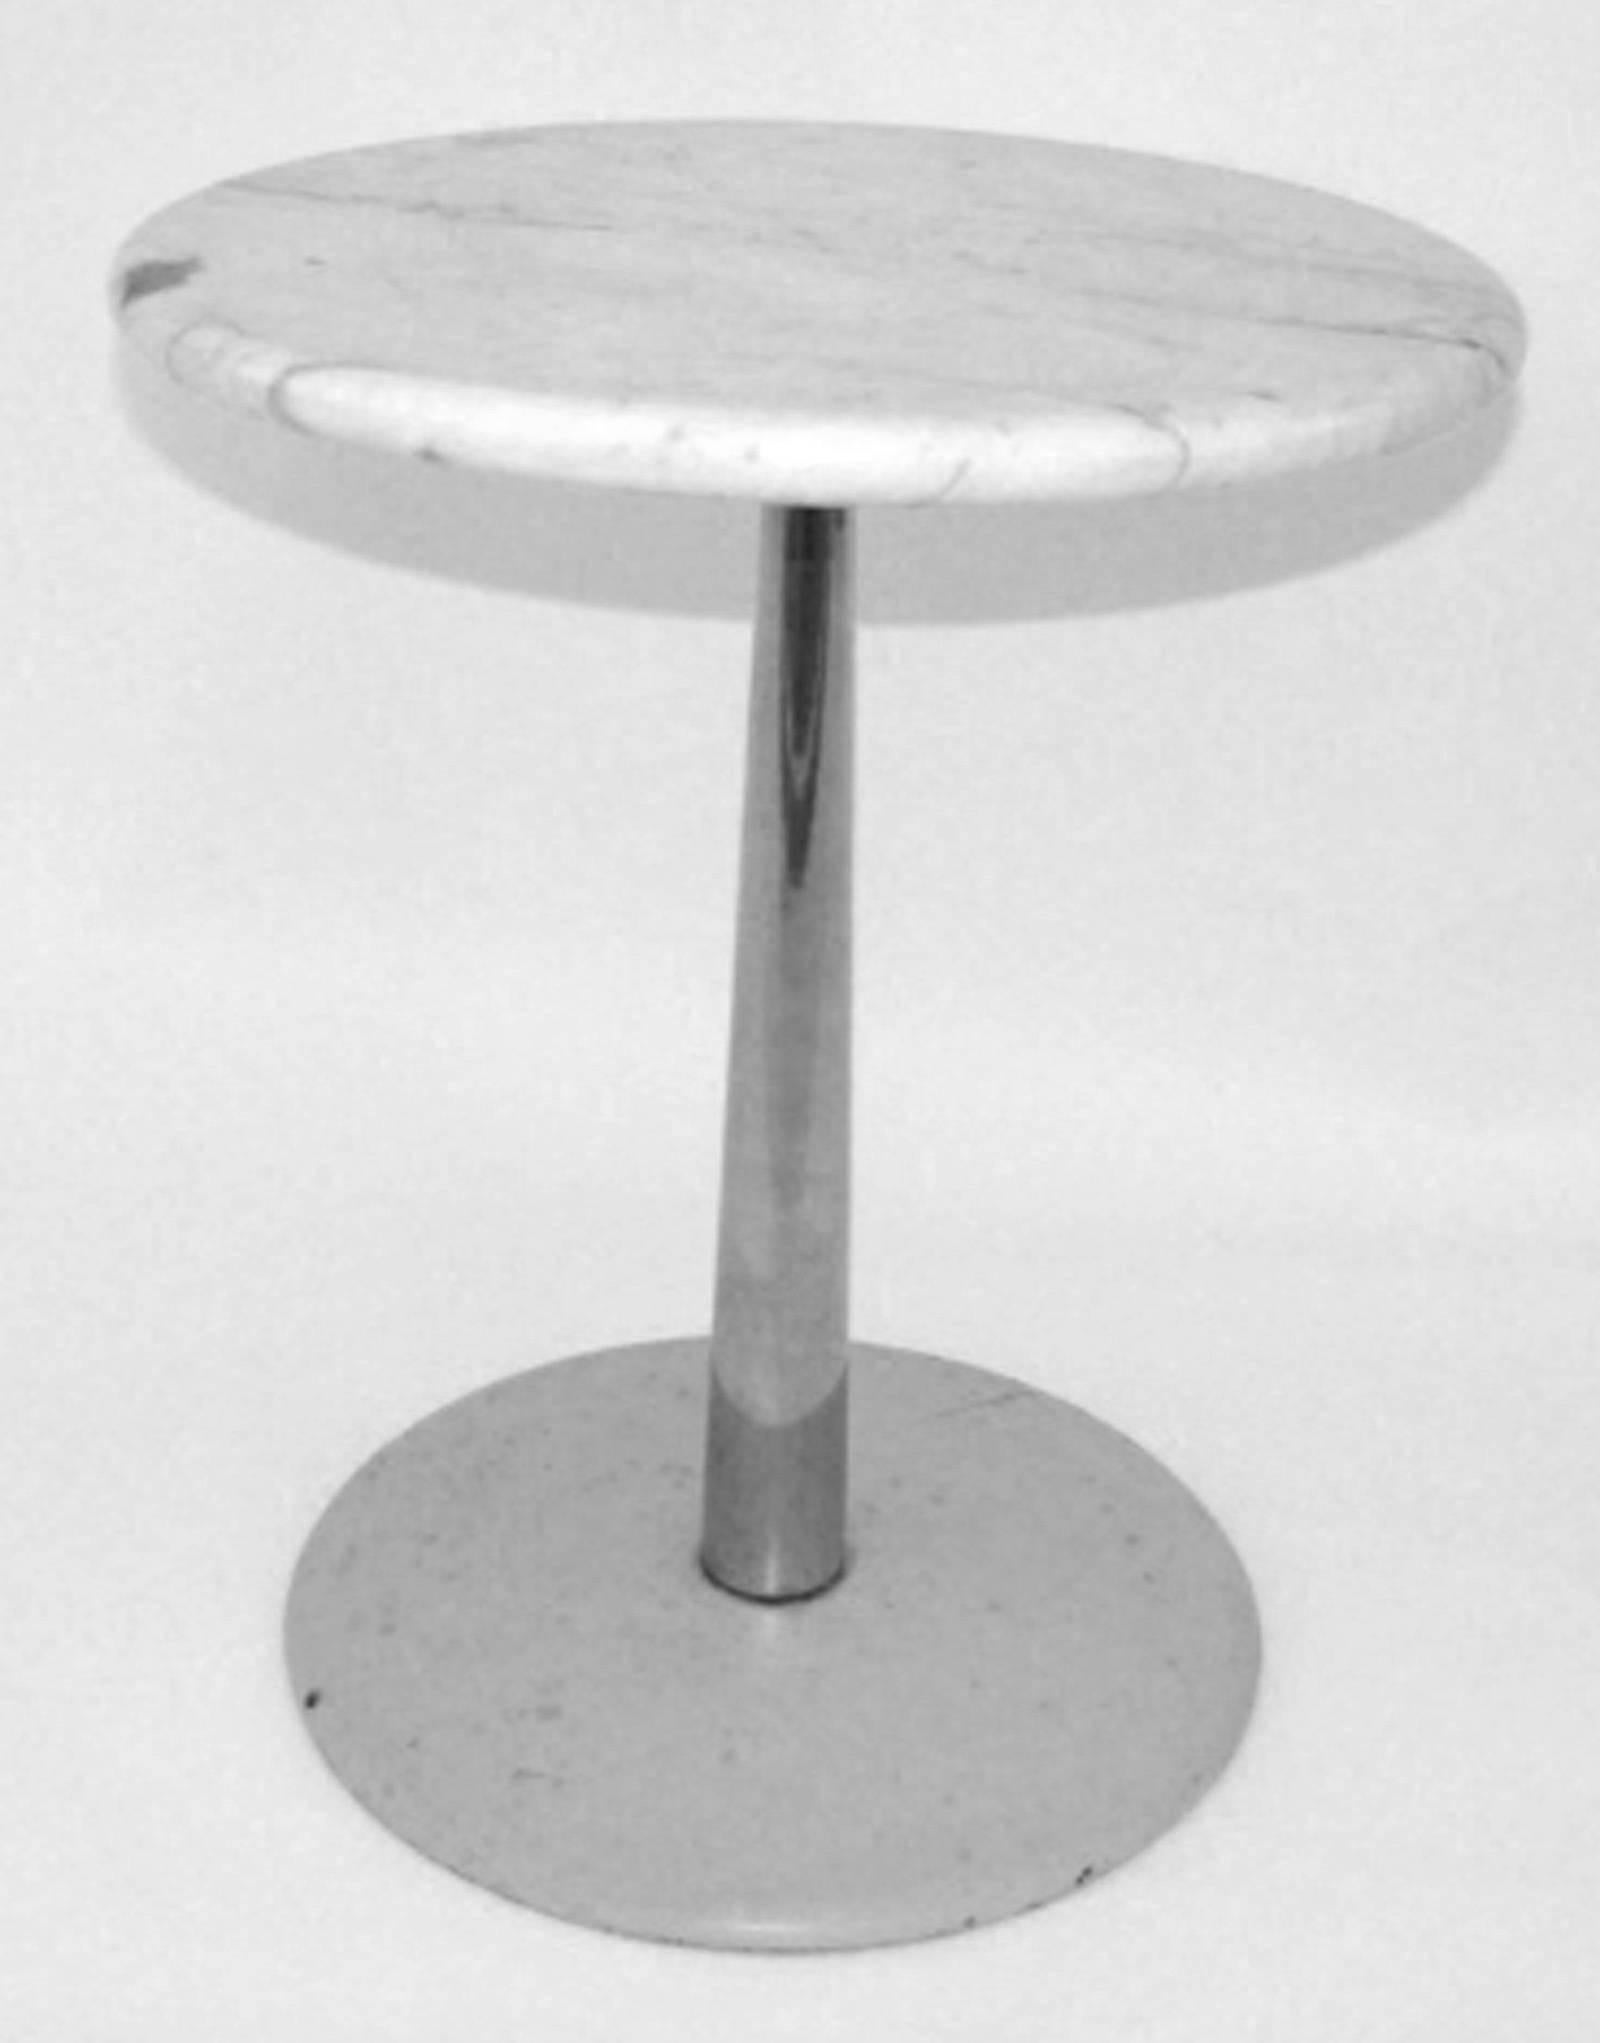 Very rare stem table, Model ST - 8 with Carrara marble top and steel base. Designed by Erwine and Estelle Laverne, circa 1960. Signed on underside of base. Marble is in excellent condition, no chips or damage. Some wear to white paint on base.